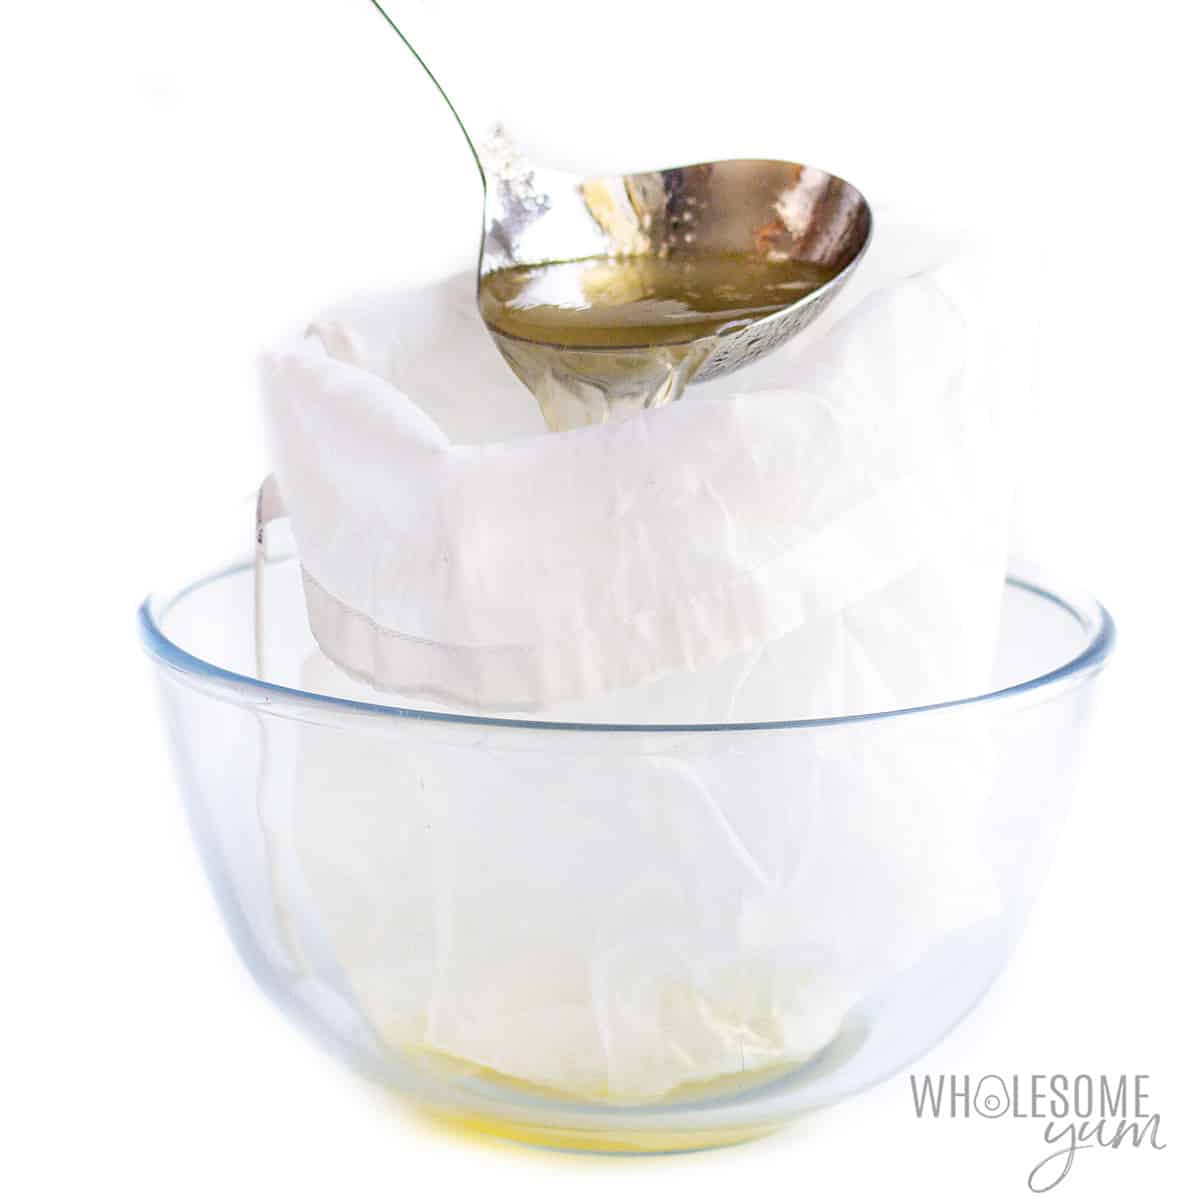 Straining in a nut milk bag over glass bowl.